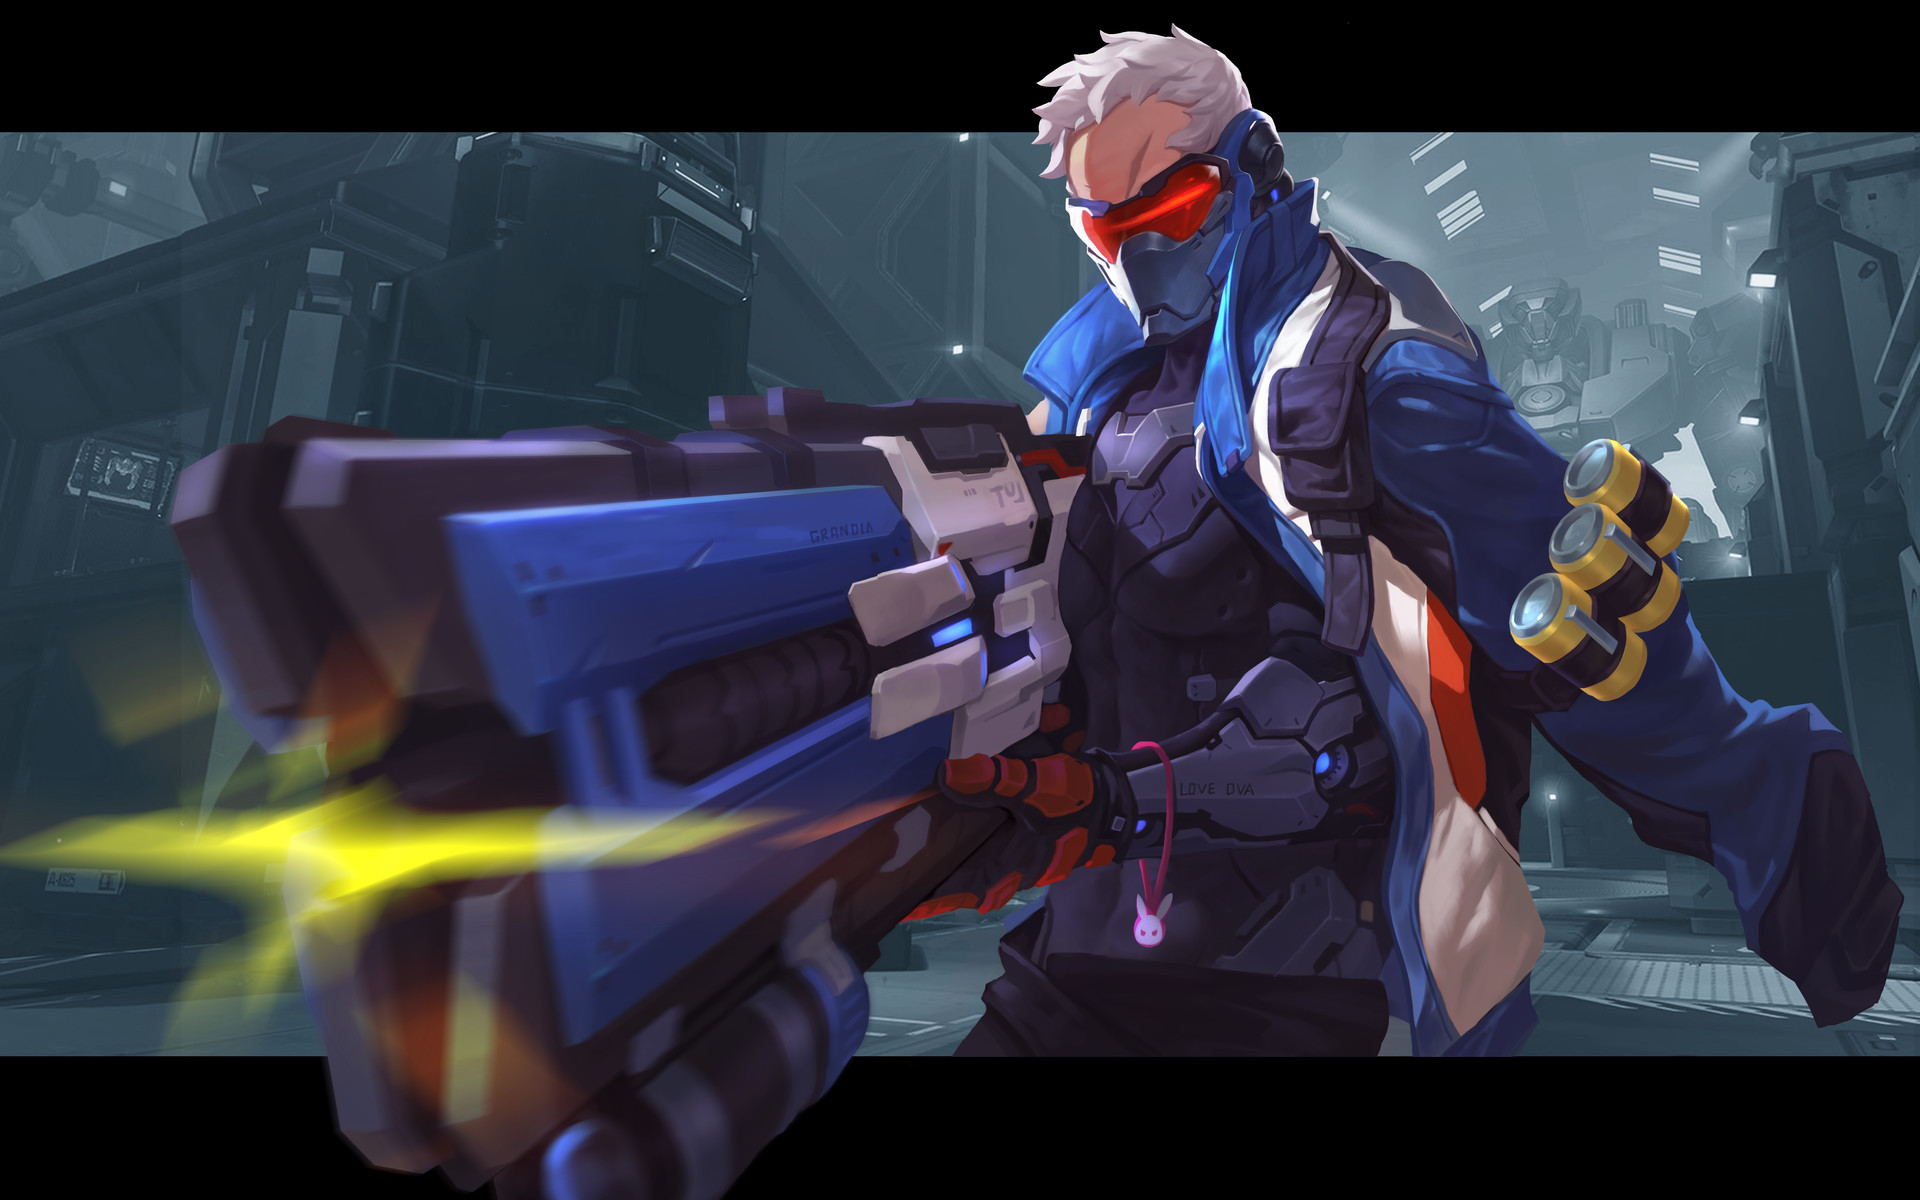 Overwatch Soldat 76 Overwatch Weapon Game Characters Video Game Art PC Gaming Video Games Video Game 1920x1200